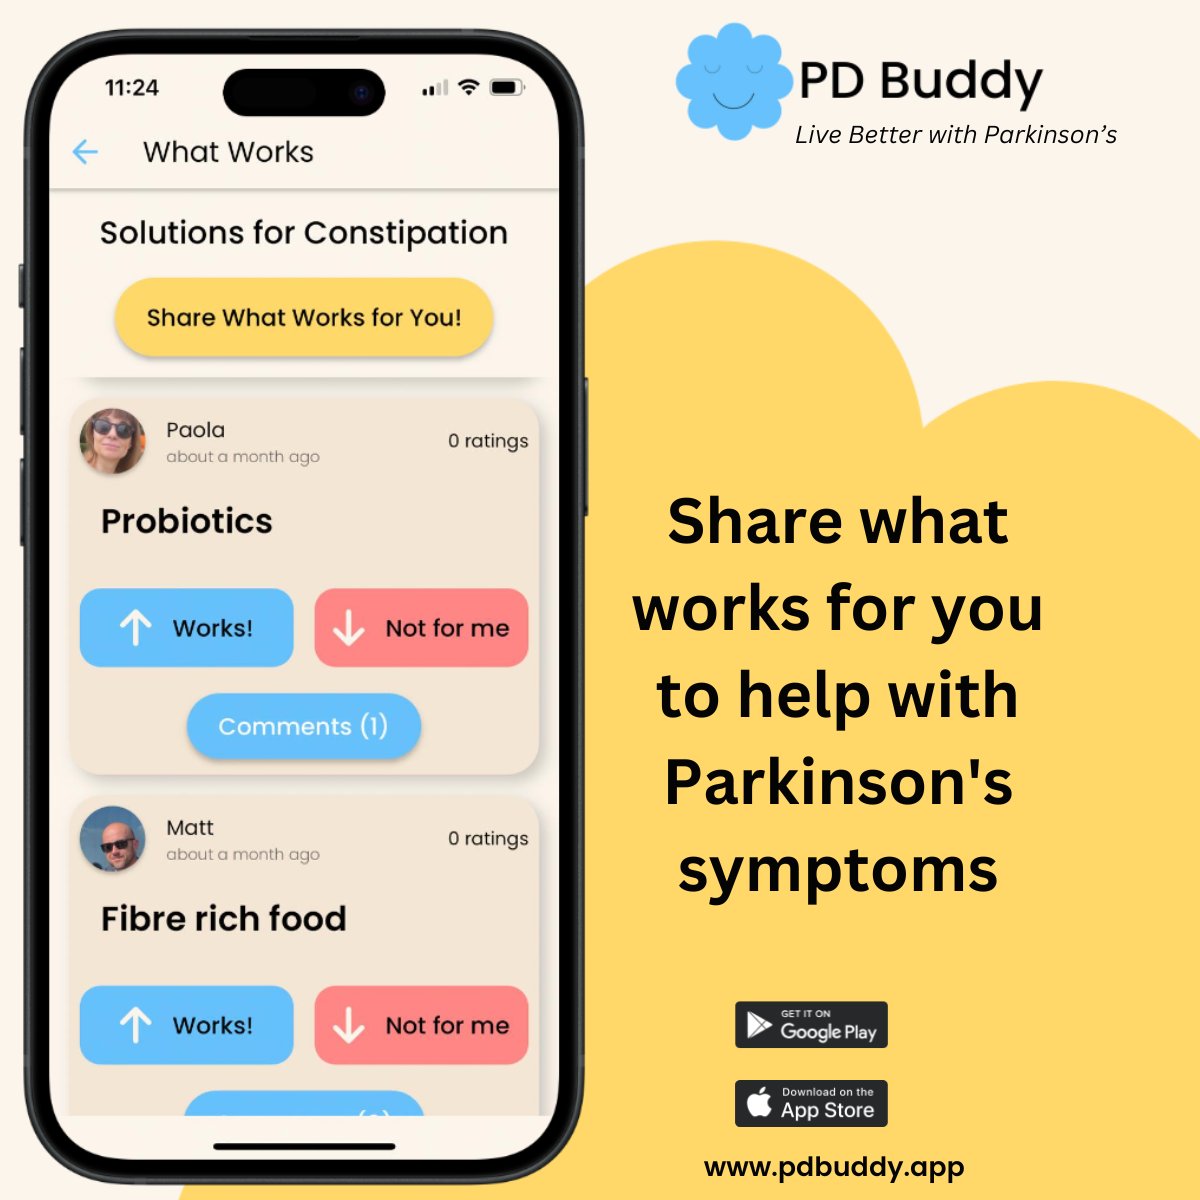 Sharing is caring, and PD Buddies share among themselves what works for them to manage their Parkinson's symptoms. There is no better way than learning from each other!
#parkinsonsdisease #parkinsontreatment #parkinsons #parkinsonsfighter #parkinsonsexercise